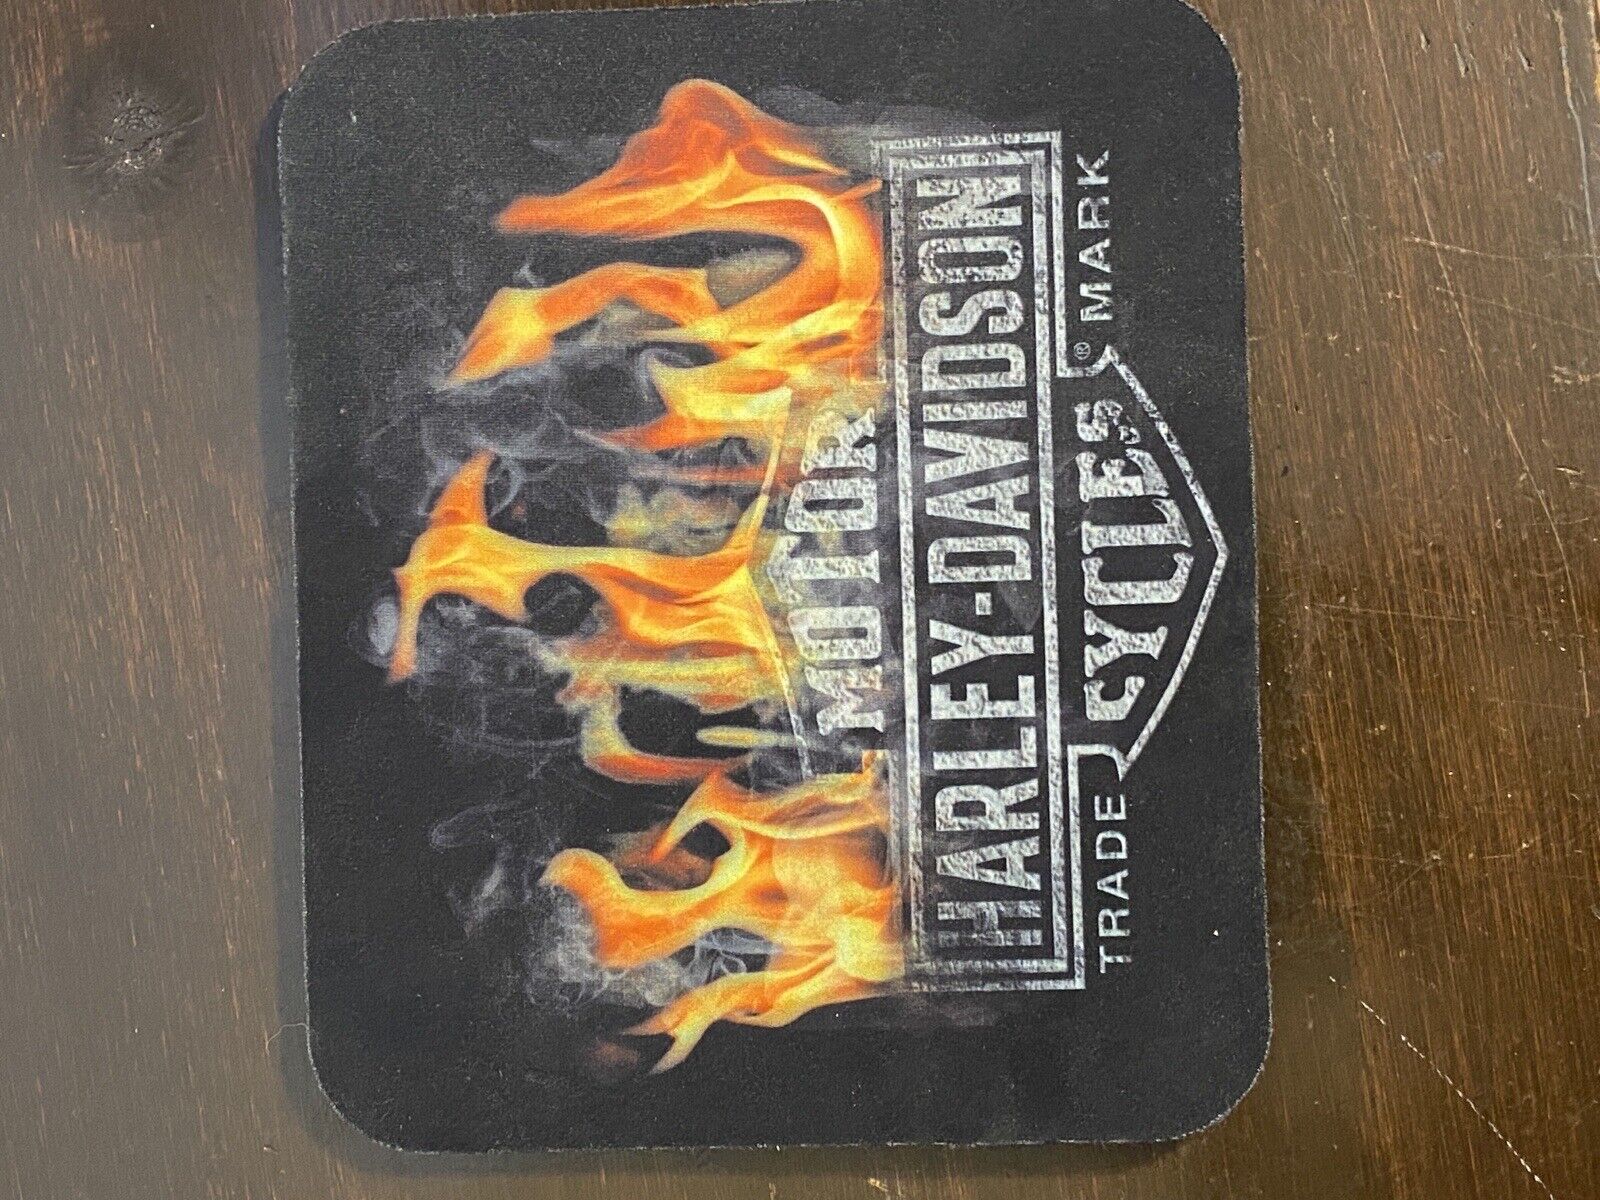 Bad A Harley Davidson Mouse Pad with Flames and Black Background 9.25 x  7.35